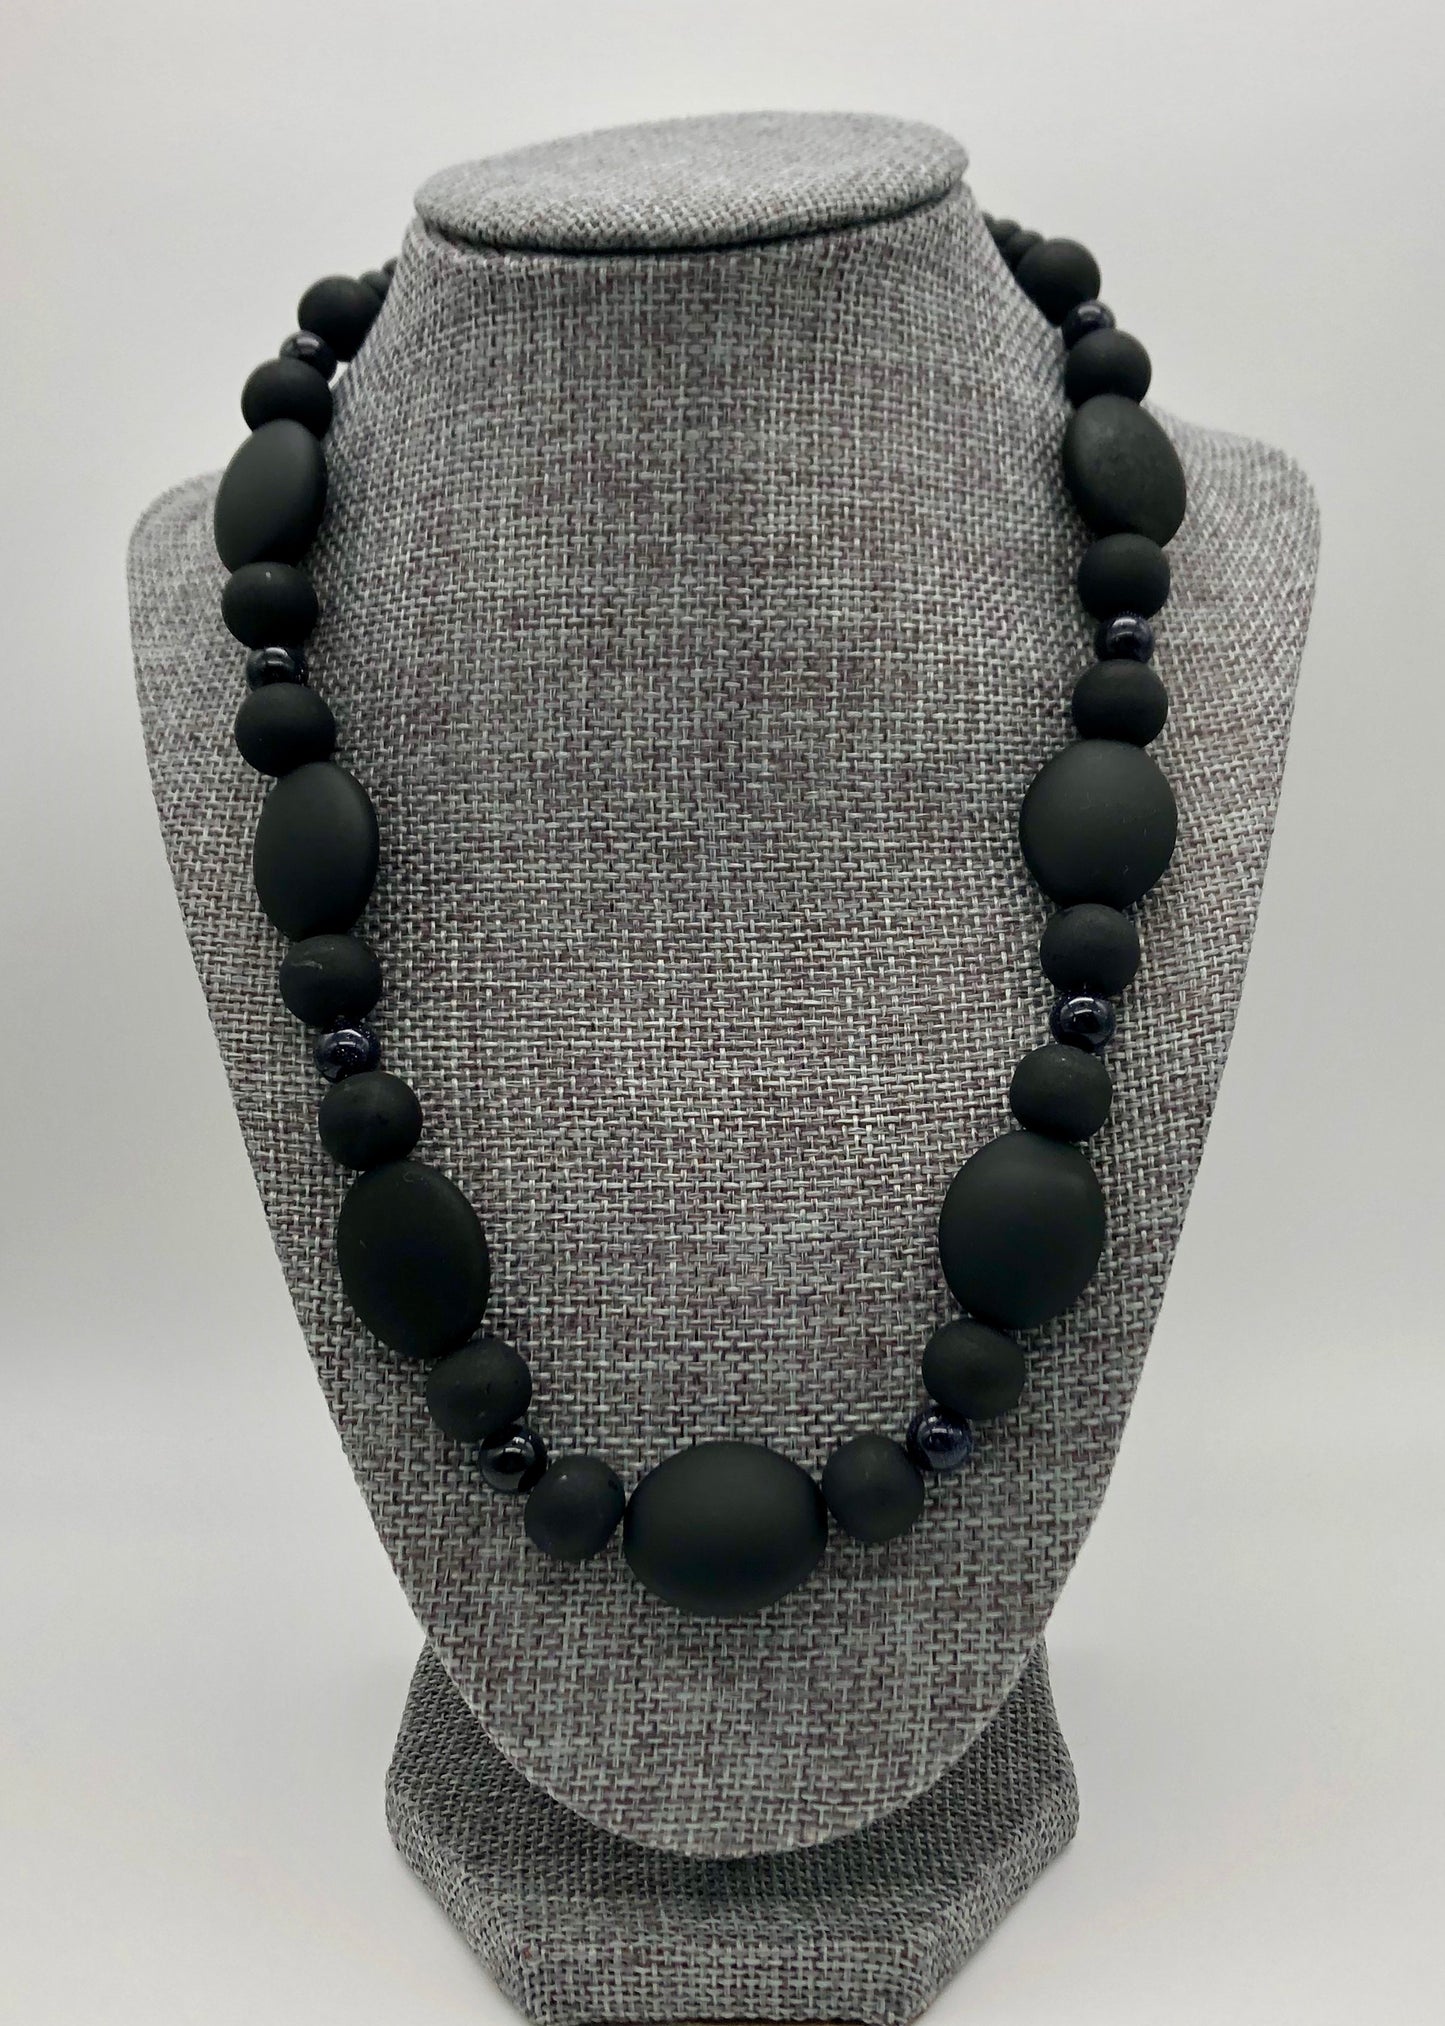 Matte black oval and black stone sparkle beaded necklace